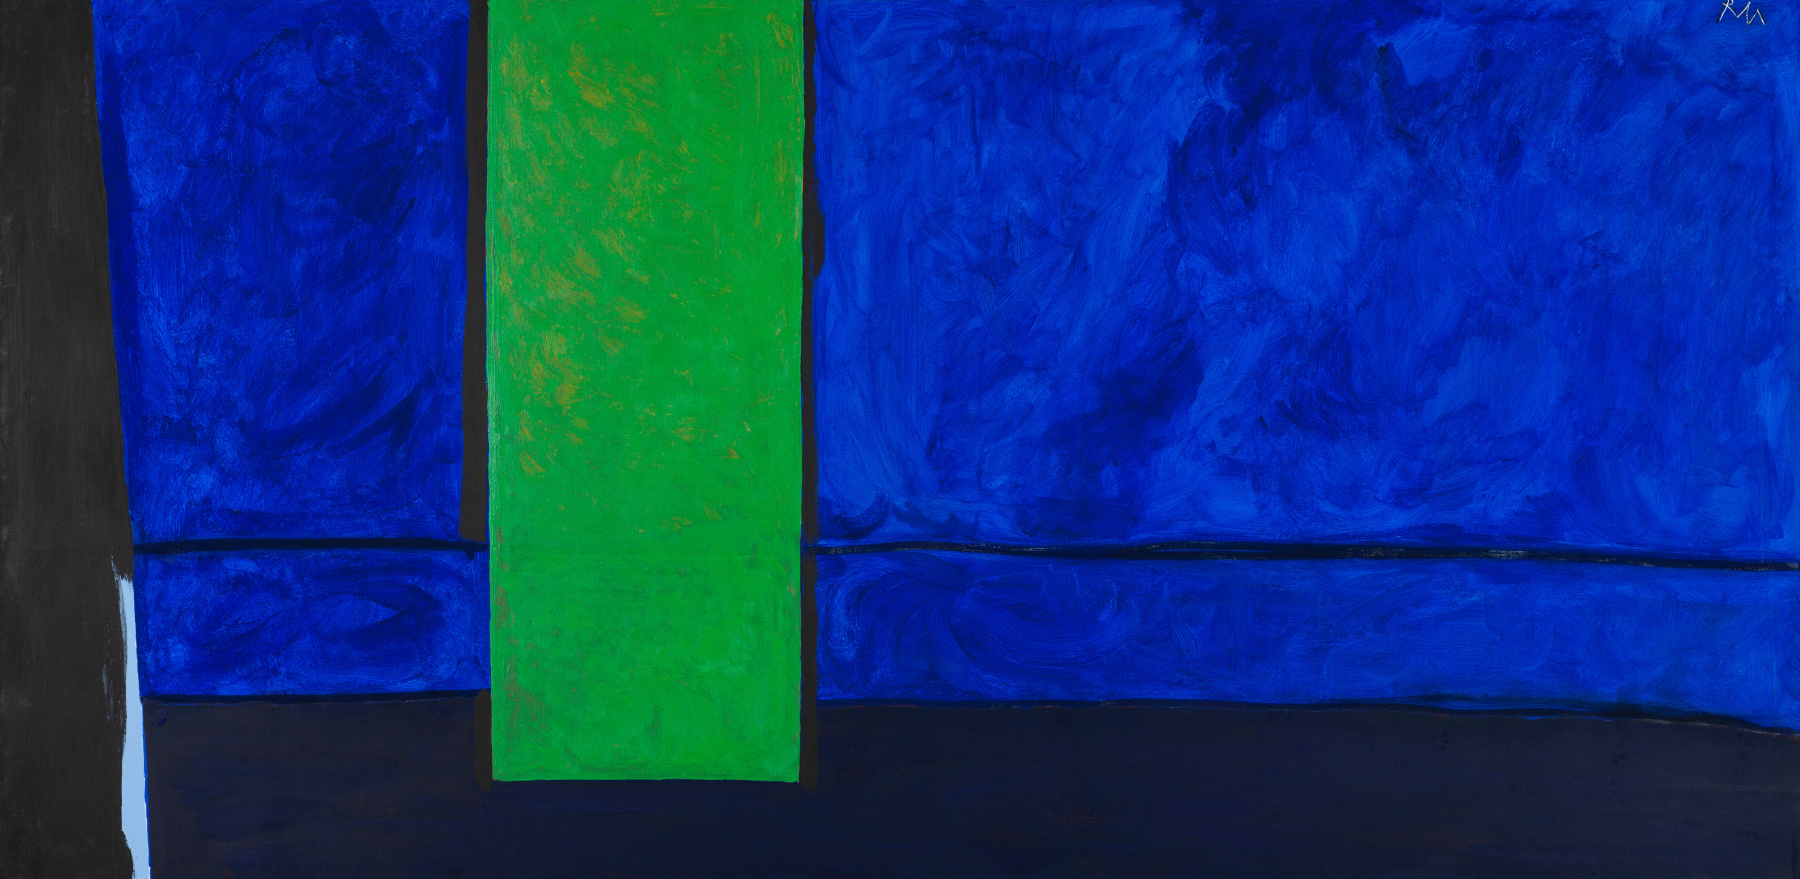 Open #165: In Blue and Black

1970

Acrylic and charcoal on canvas

53.5 x 108 inches

135.9 x 274.3cm